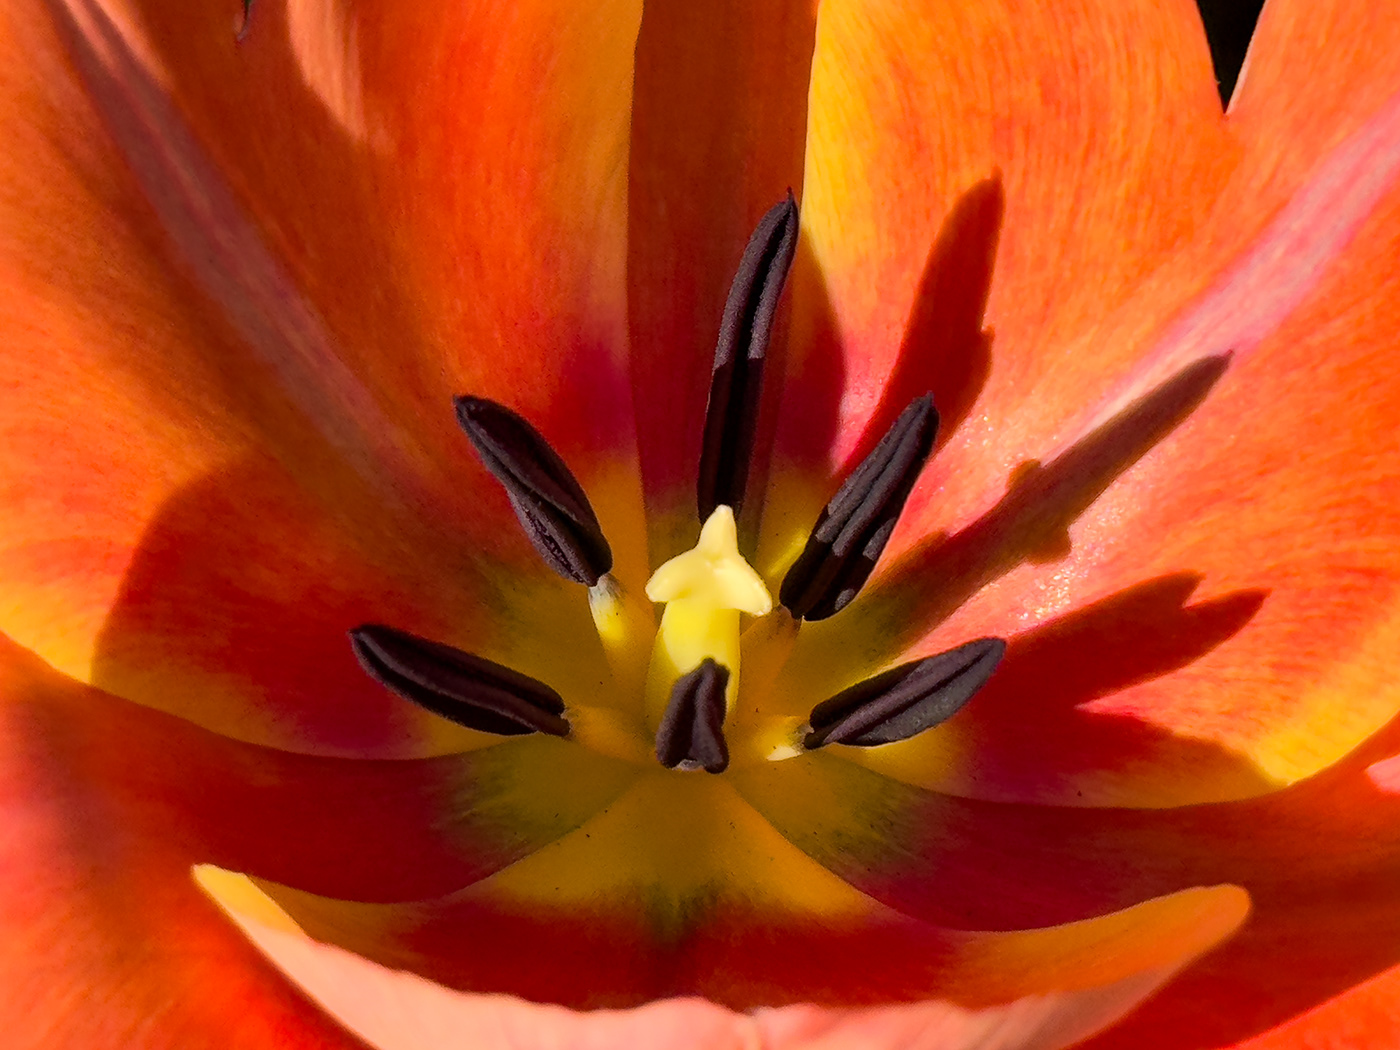 floral magnolia tulips Flowers Nature Photography  lightroom spring petals daffodils